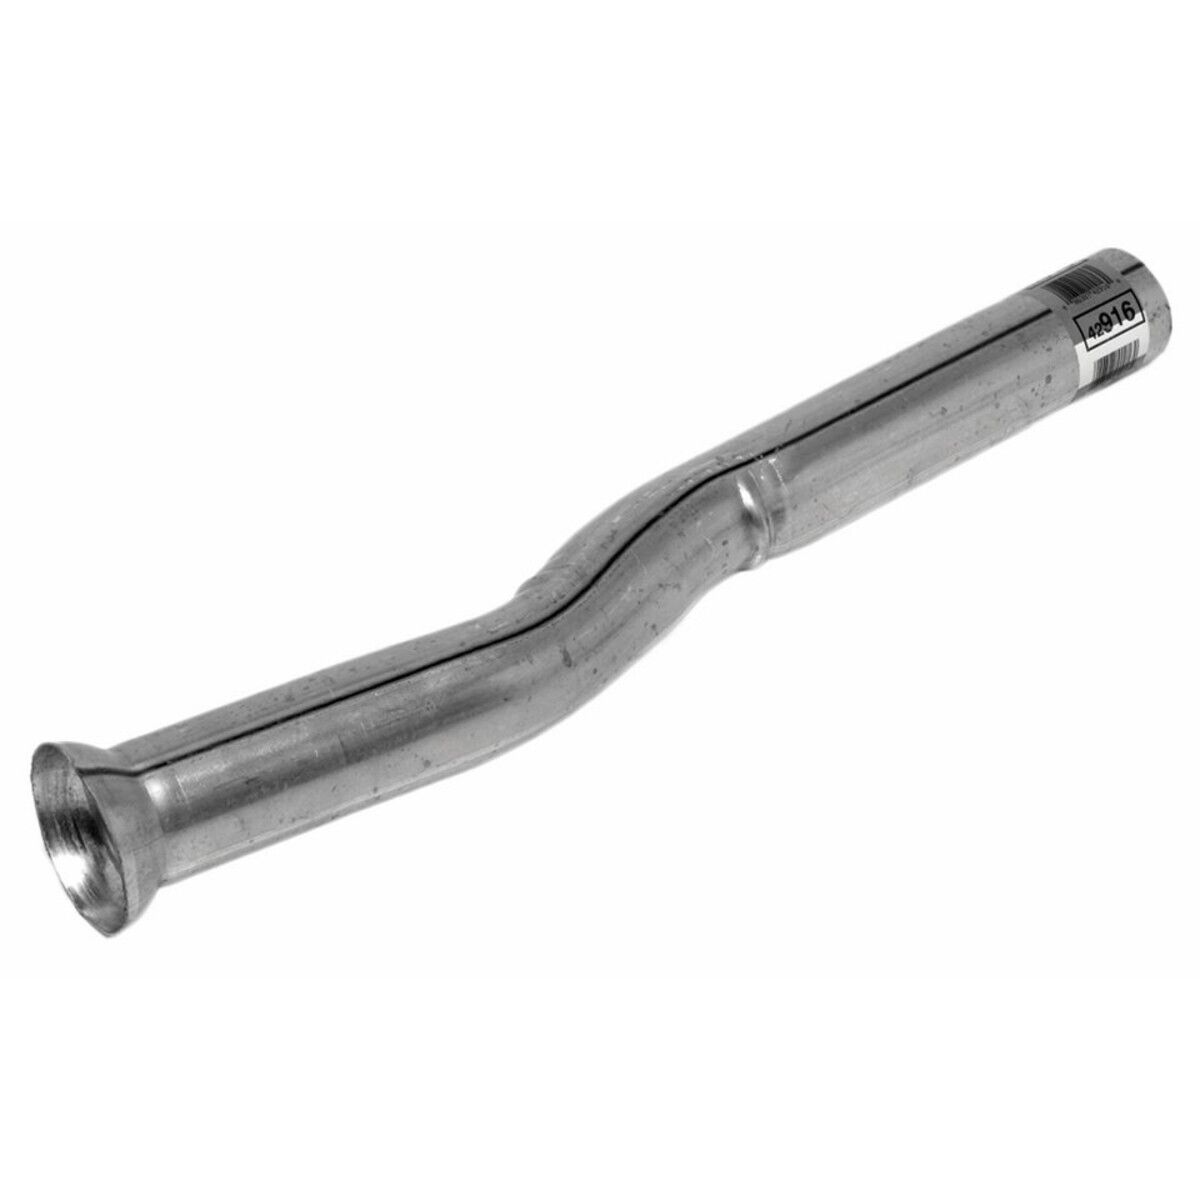 42916 Walker Exhaust Pipe for Chevy S10 Pickup S15 Chevrolet S-10 GMC 1988-1990